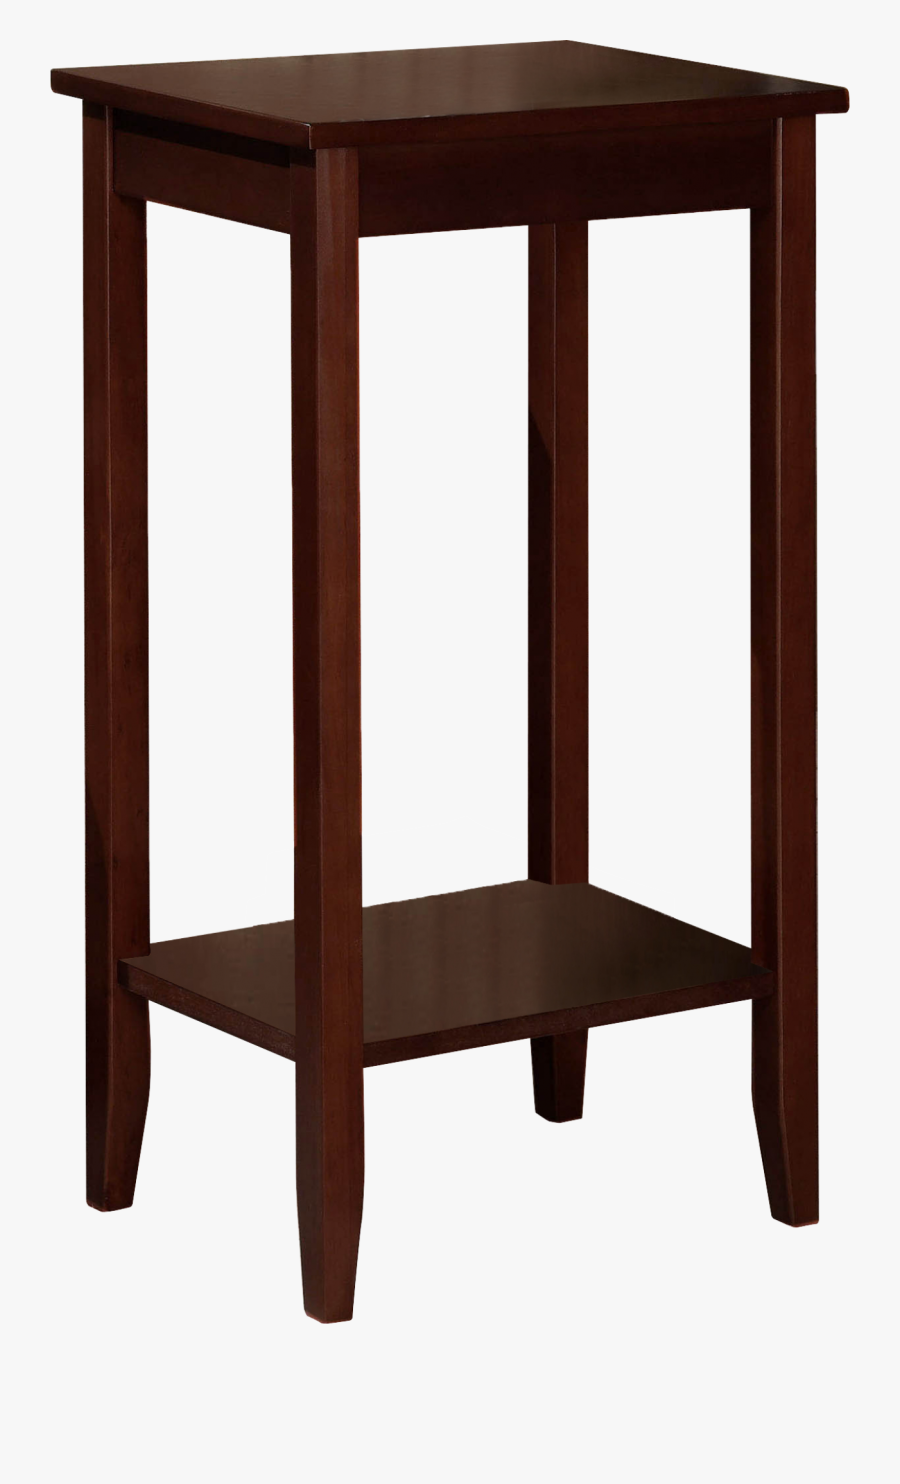 End Table Png - Tall End Table Png, Transparent Clipart